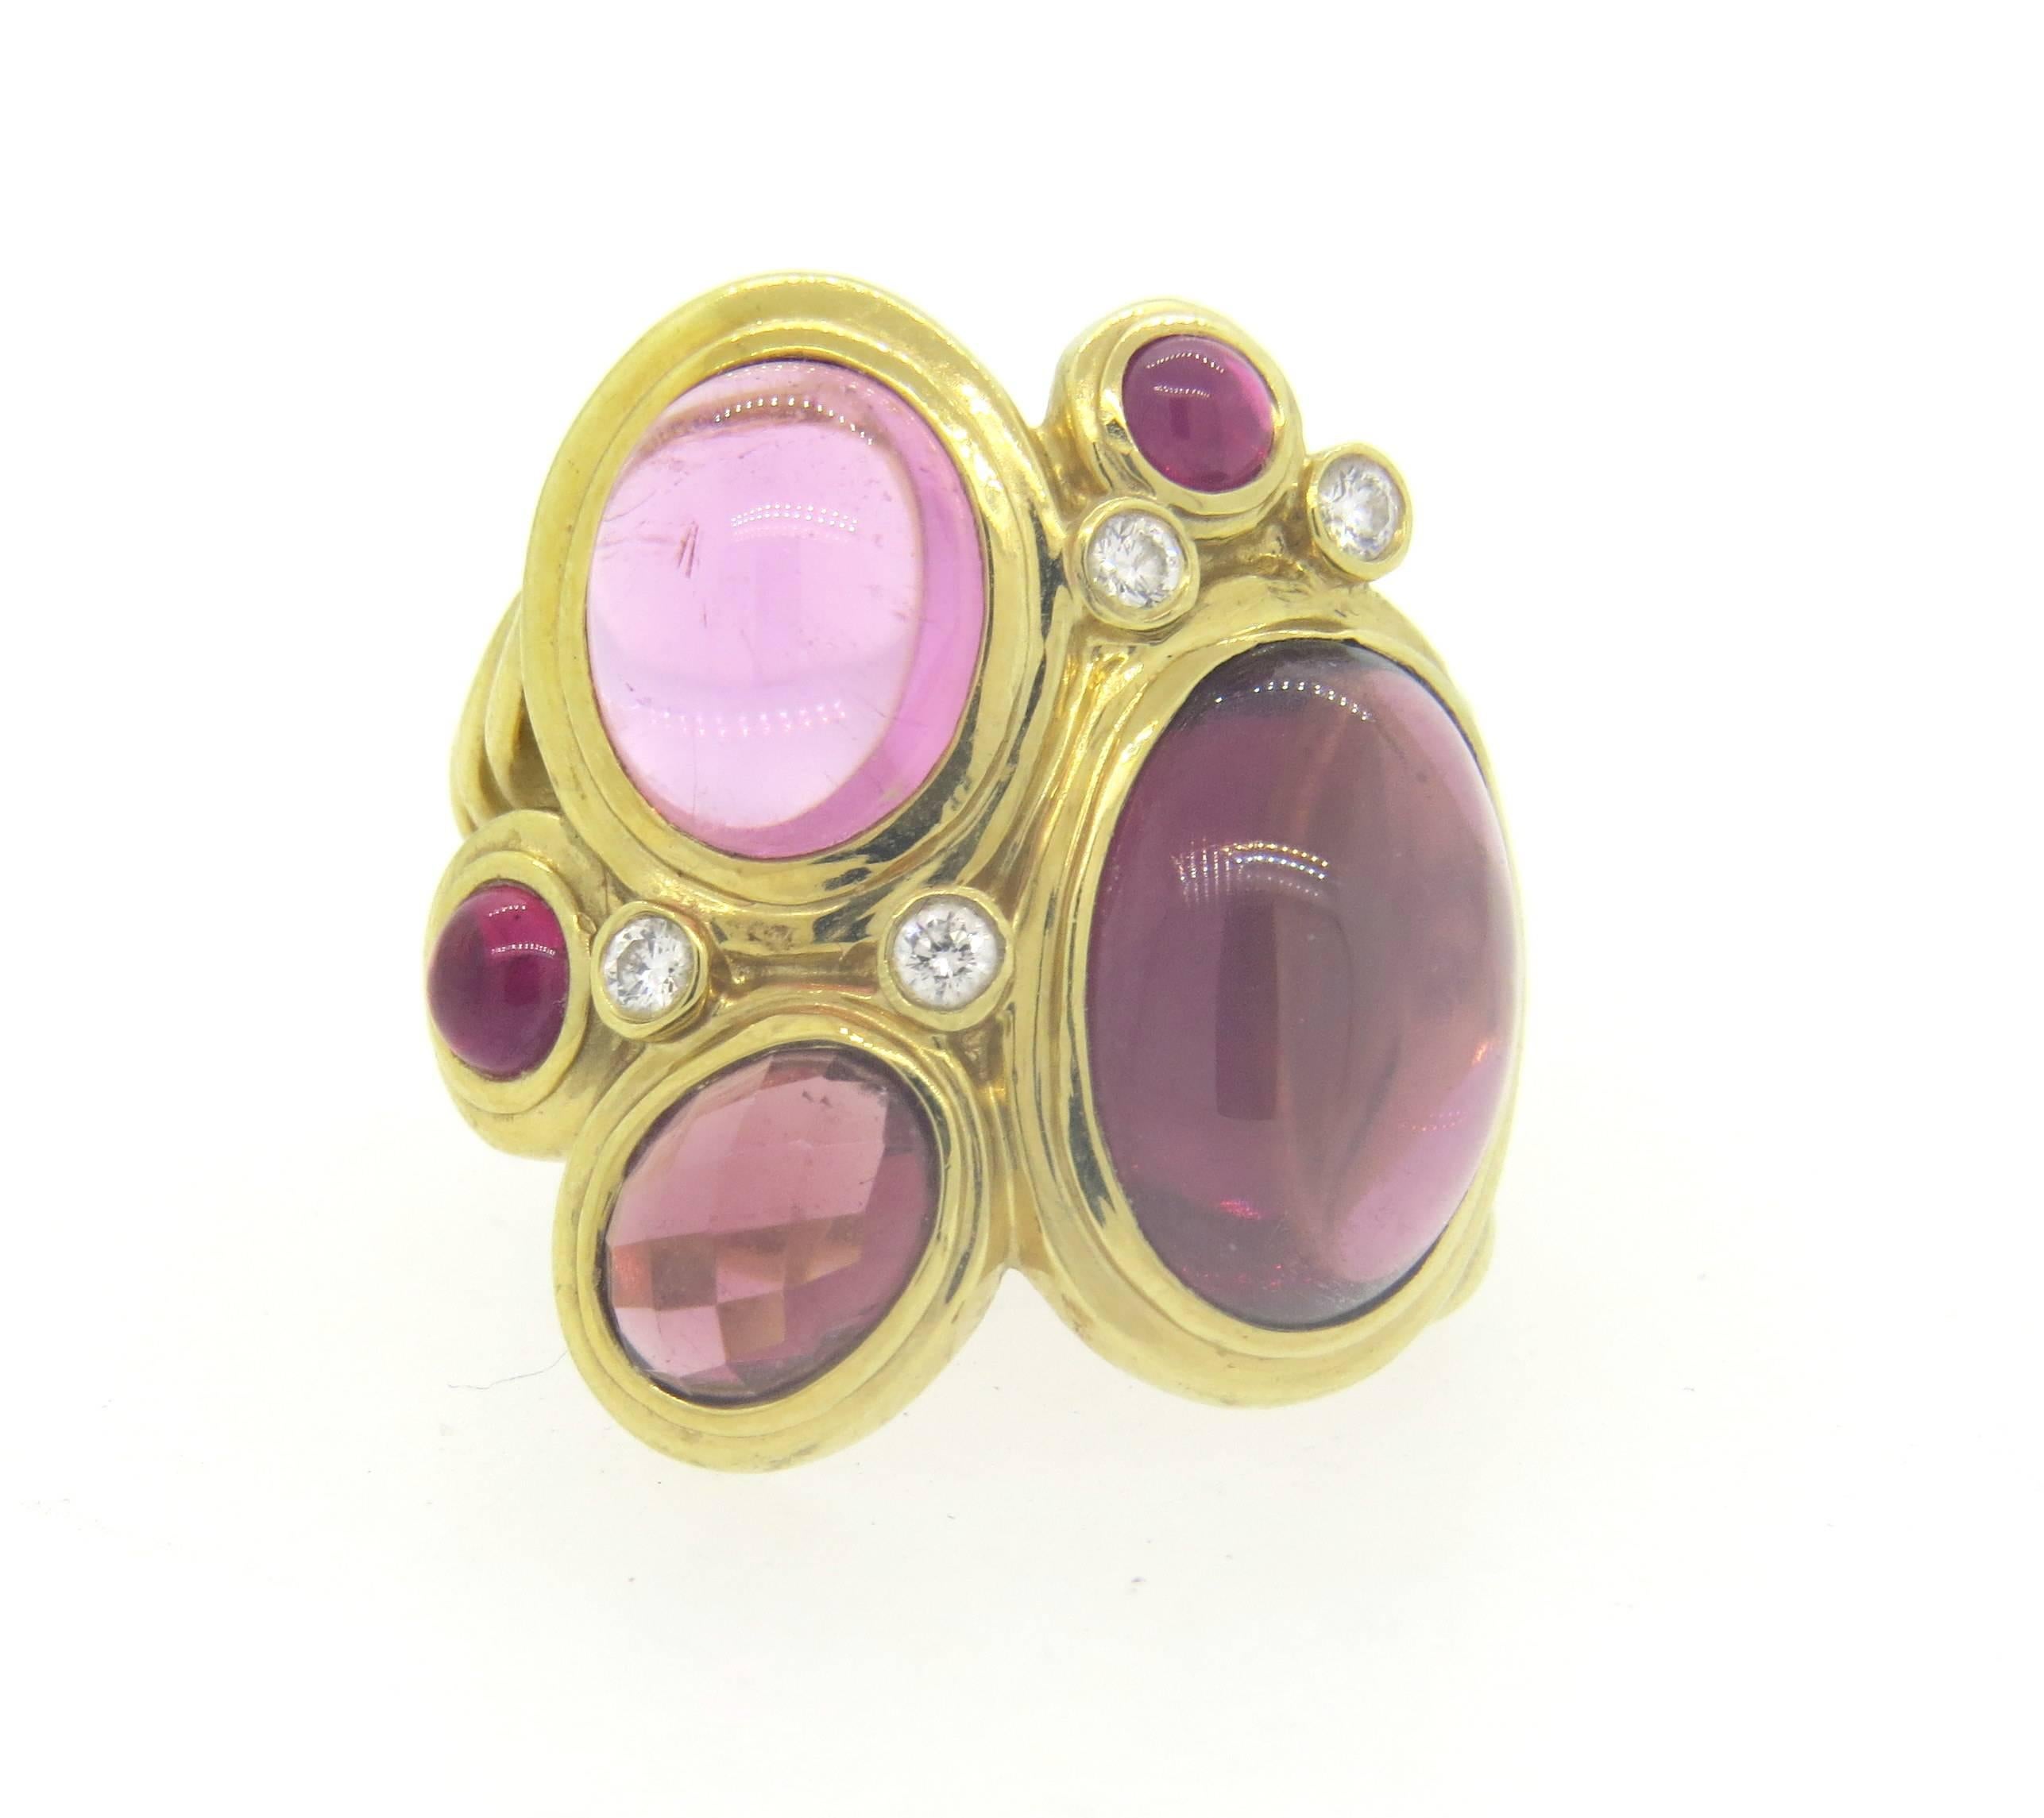 large 18k yellow gold ring, crafted by David Yurman for Mosaic collection, decorated with theodolite garnet , faceted and cabochon pink tourmalines and diamonds. Ring is a size 6 1/2, ring top is 25mm wide. Marked: D.Y.,750. Weight of the piece -